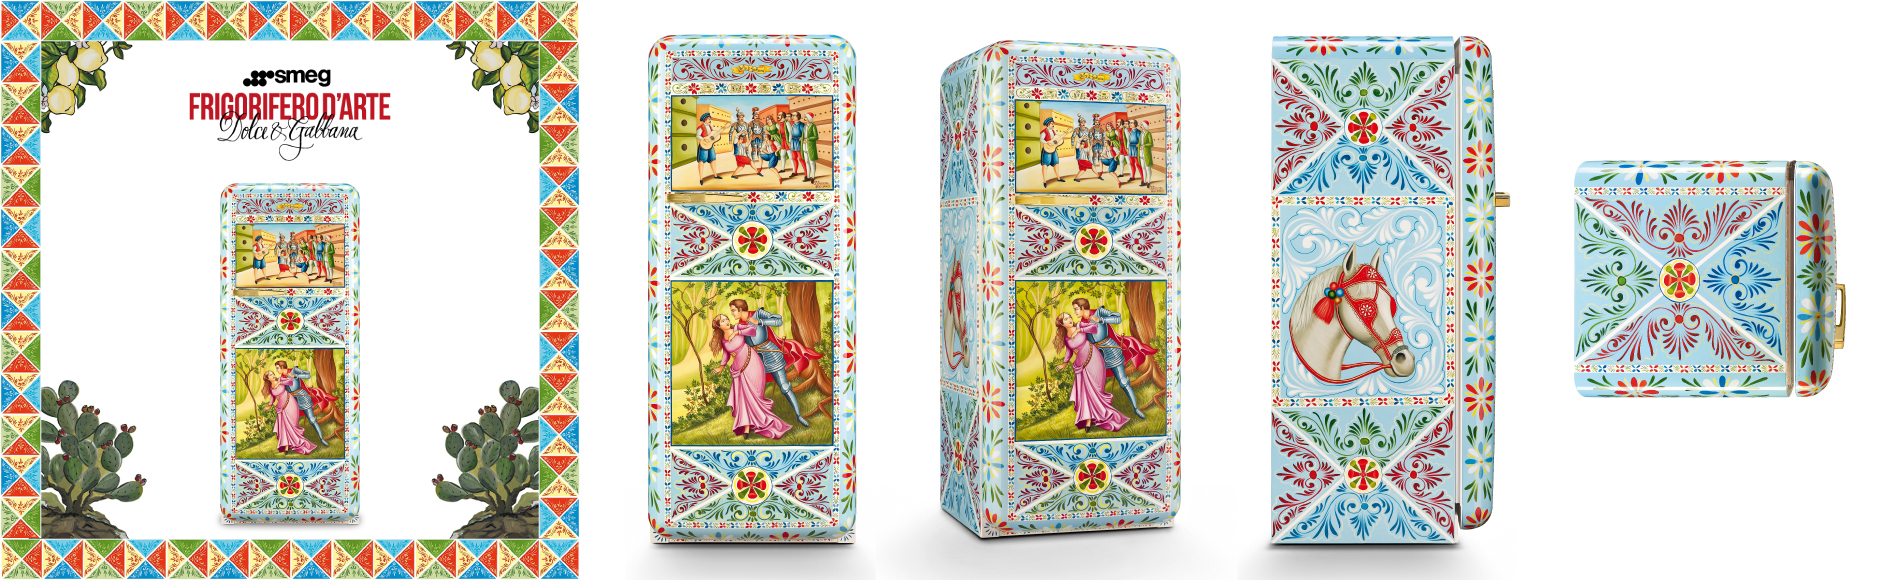 Exclusive Hand Painted Smeg Dolce & Gabbana Refrigerator Unveiled 